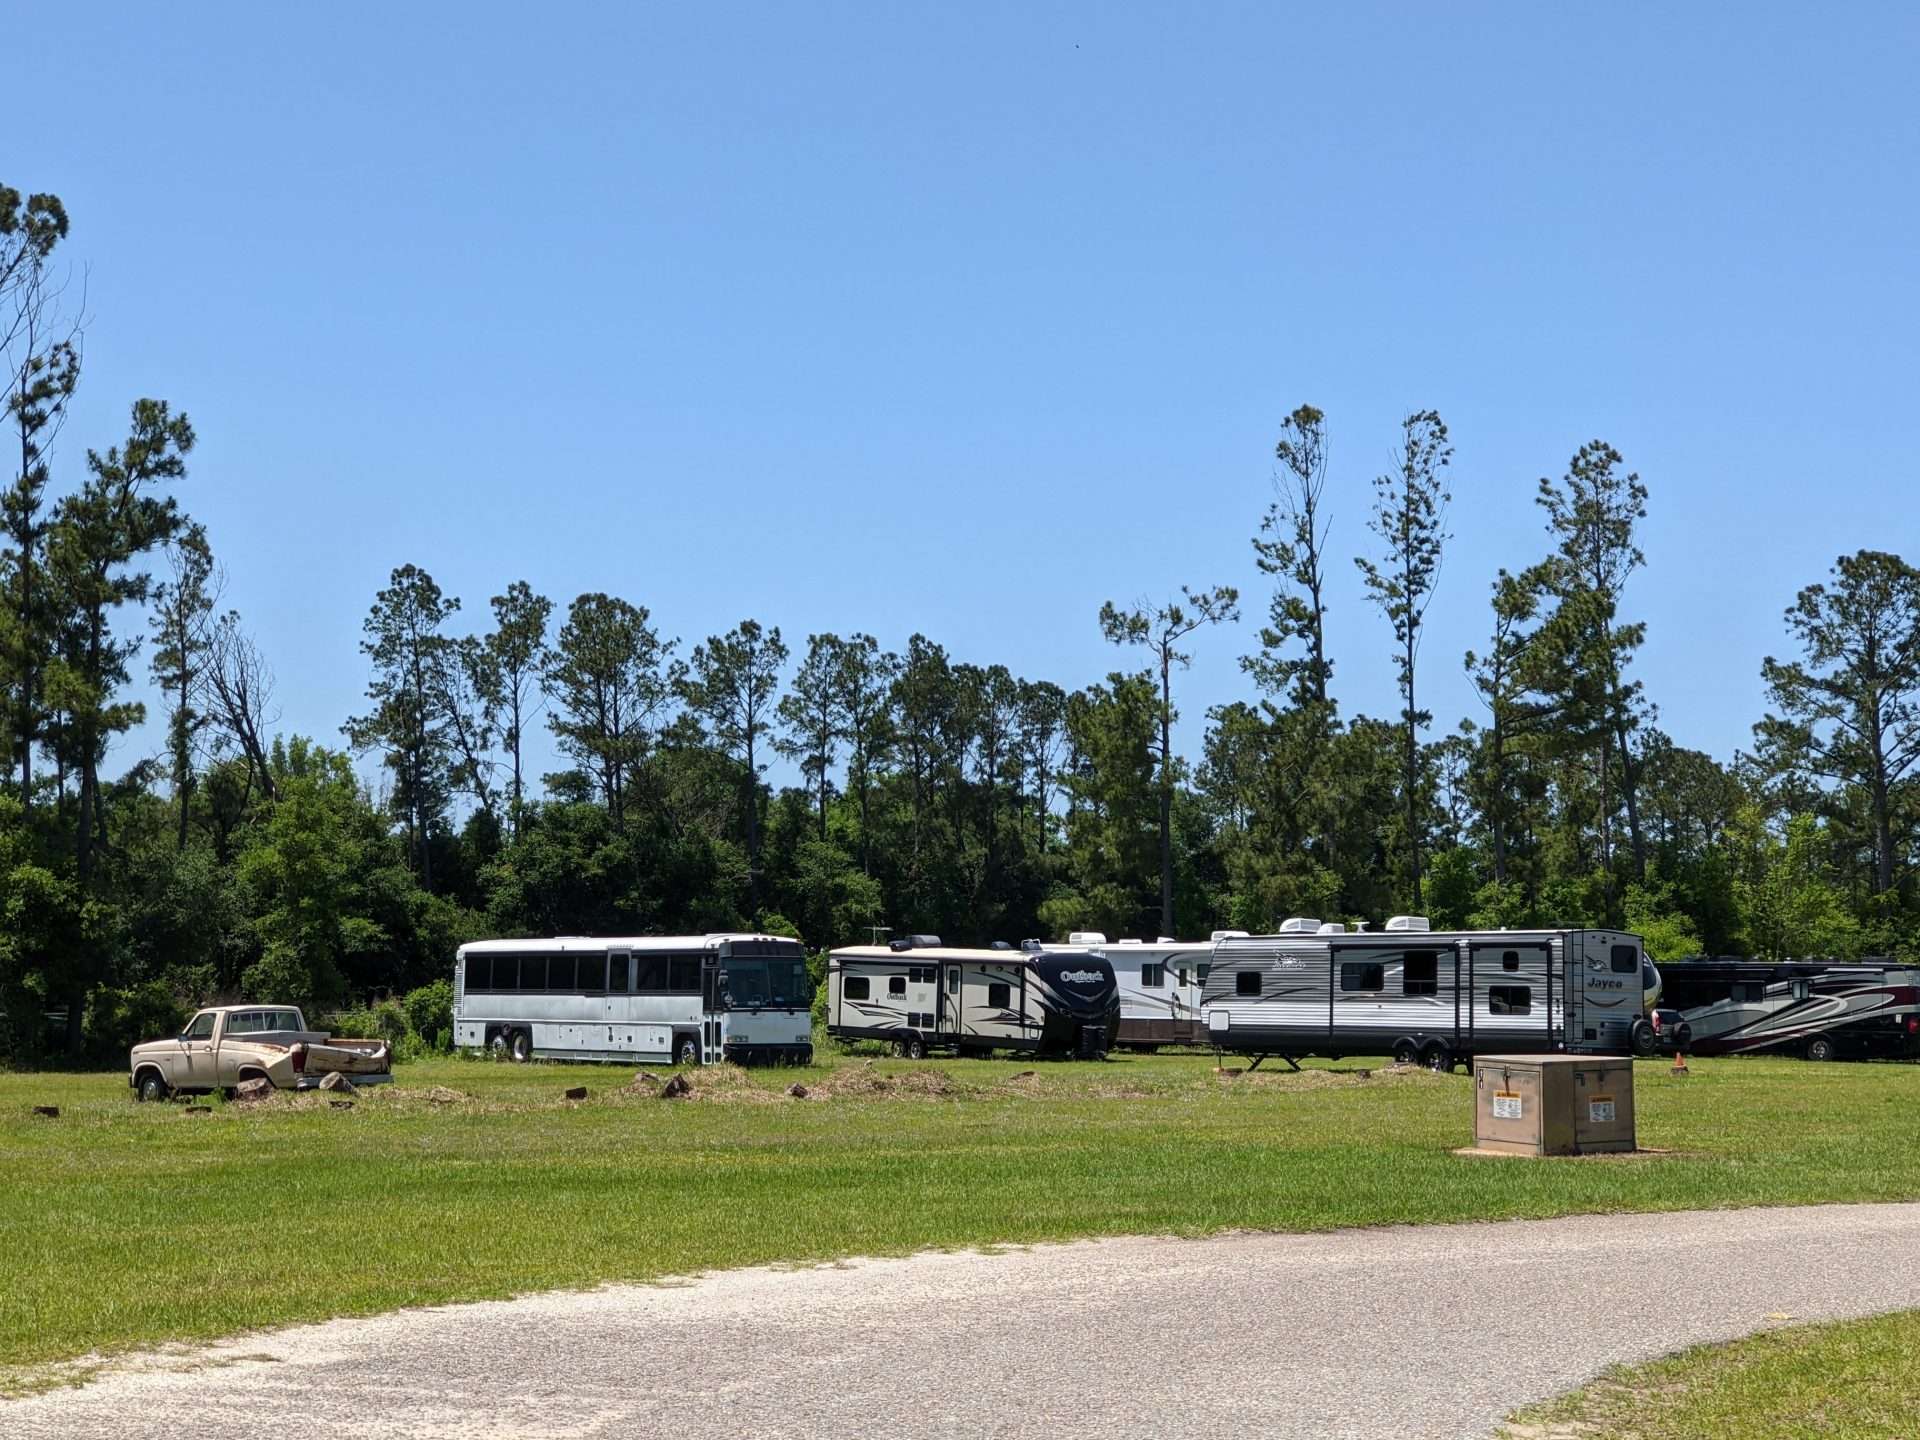 RVs parked together at campsite.